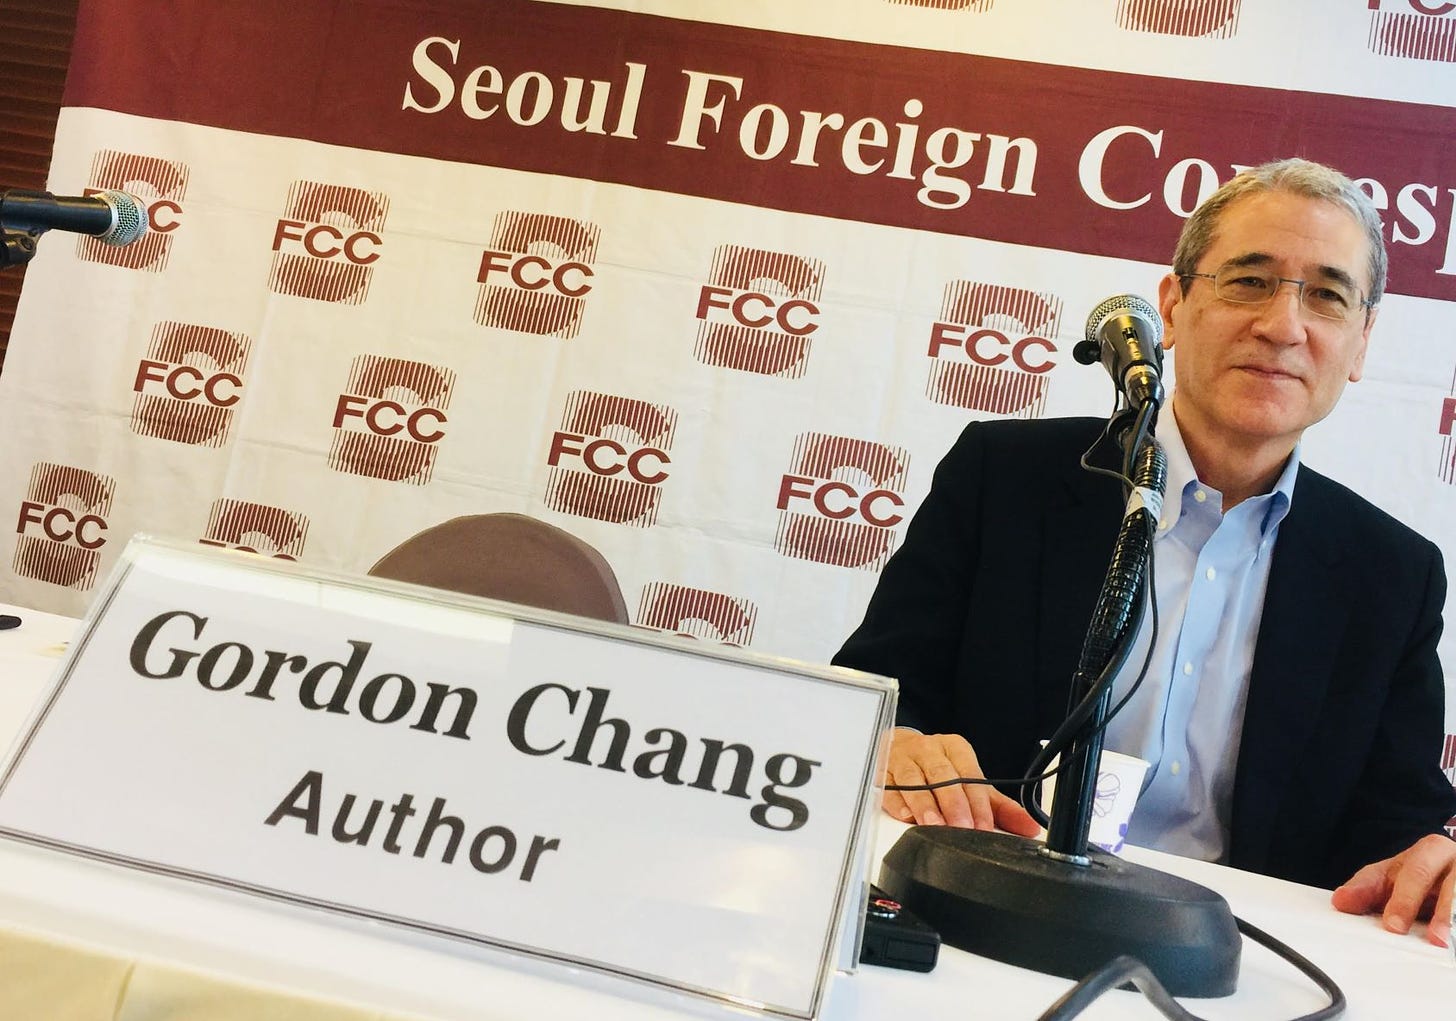 Gordon Chang fires on all cylinders in Seoul - Asia Times